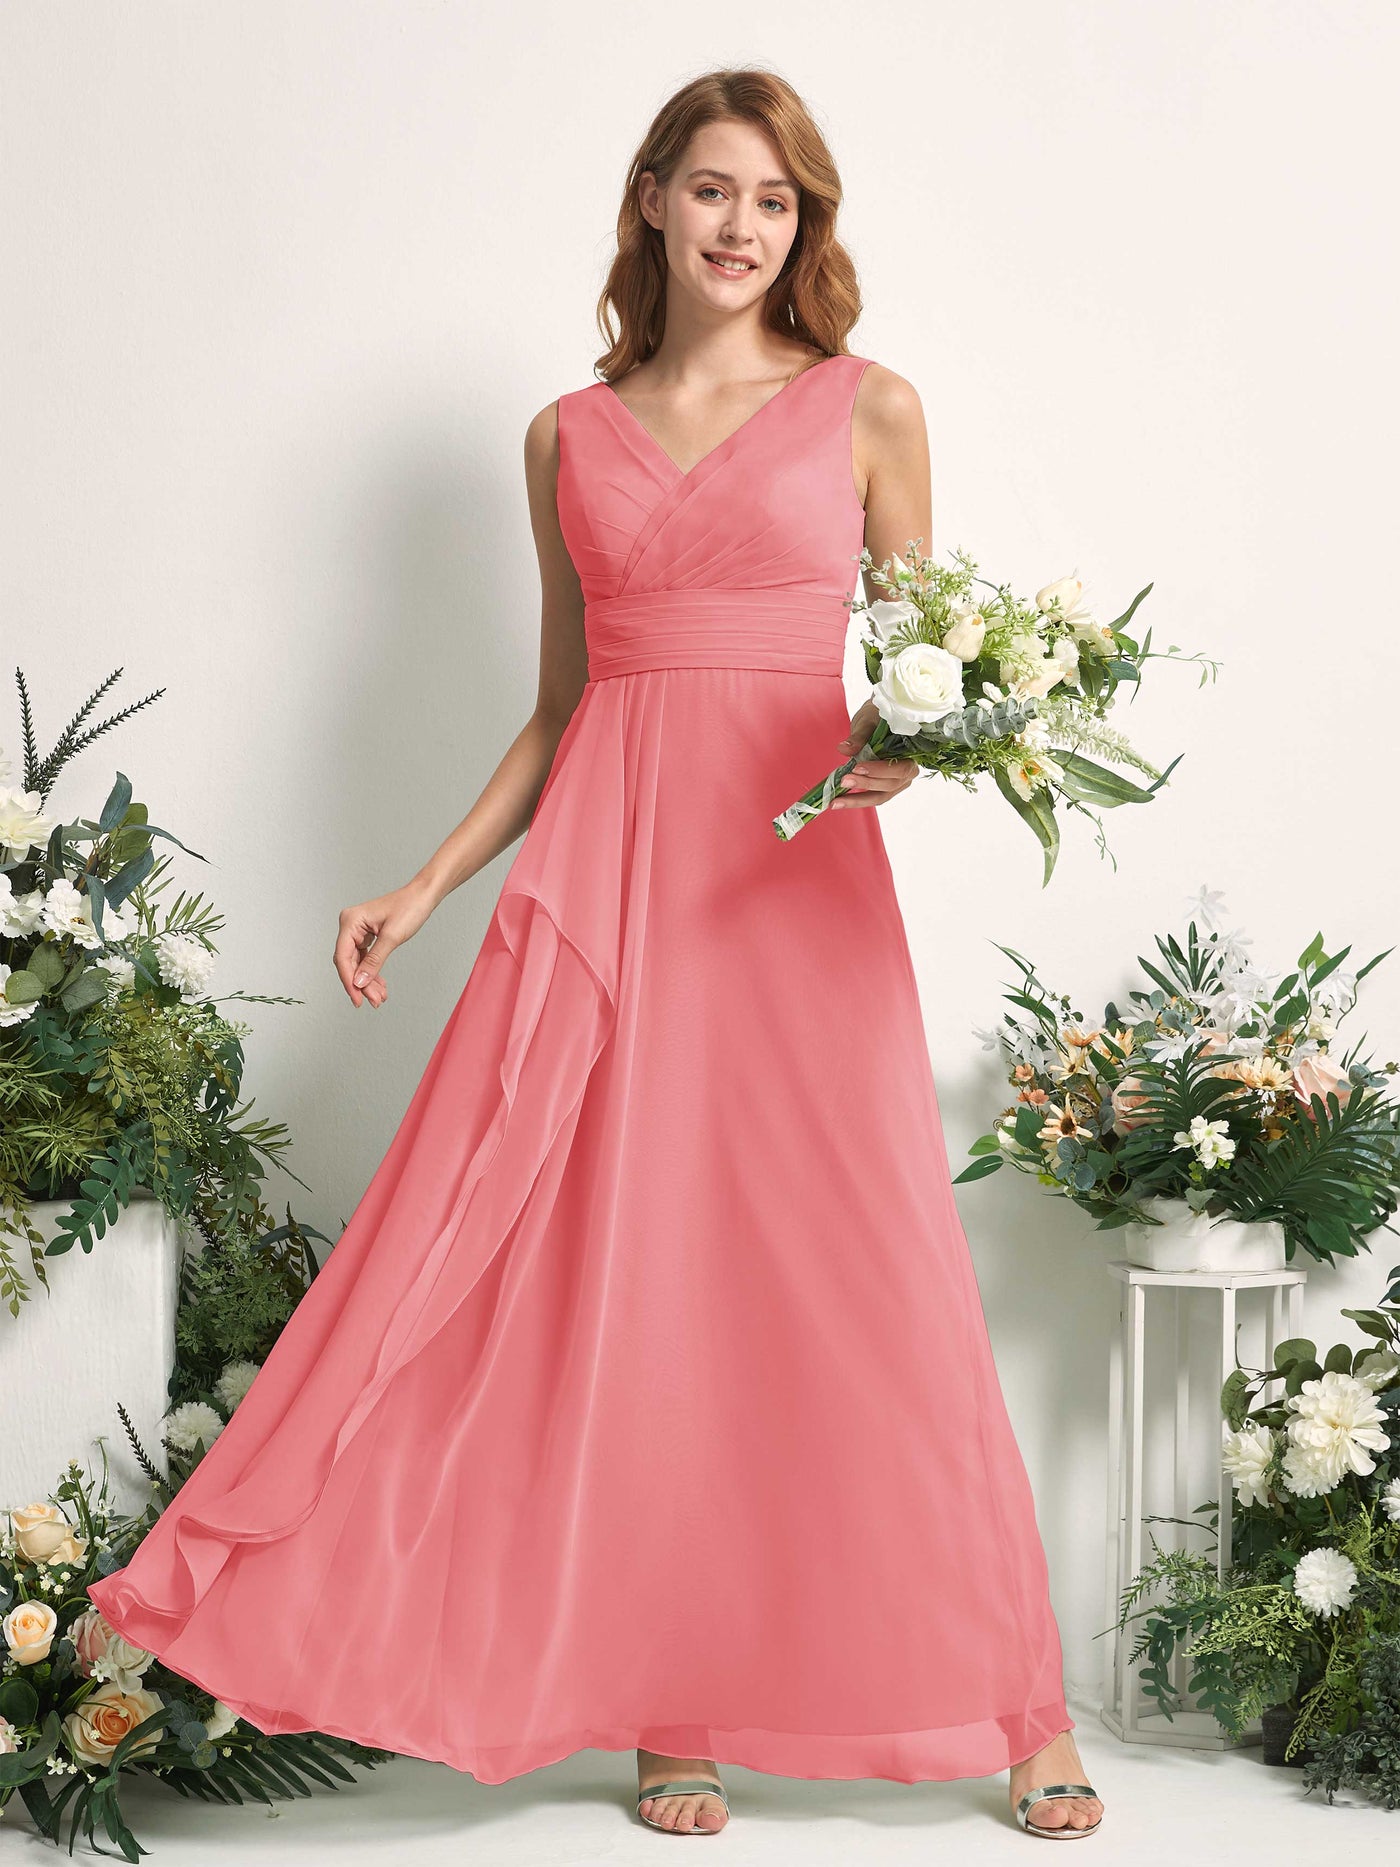 Bridesmaid Dress A-line Chiffon V-neck Full Length Sleeveless Wedding Party Dress - Coral Pink (81227130)#color_coral-pink